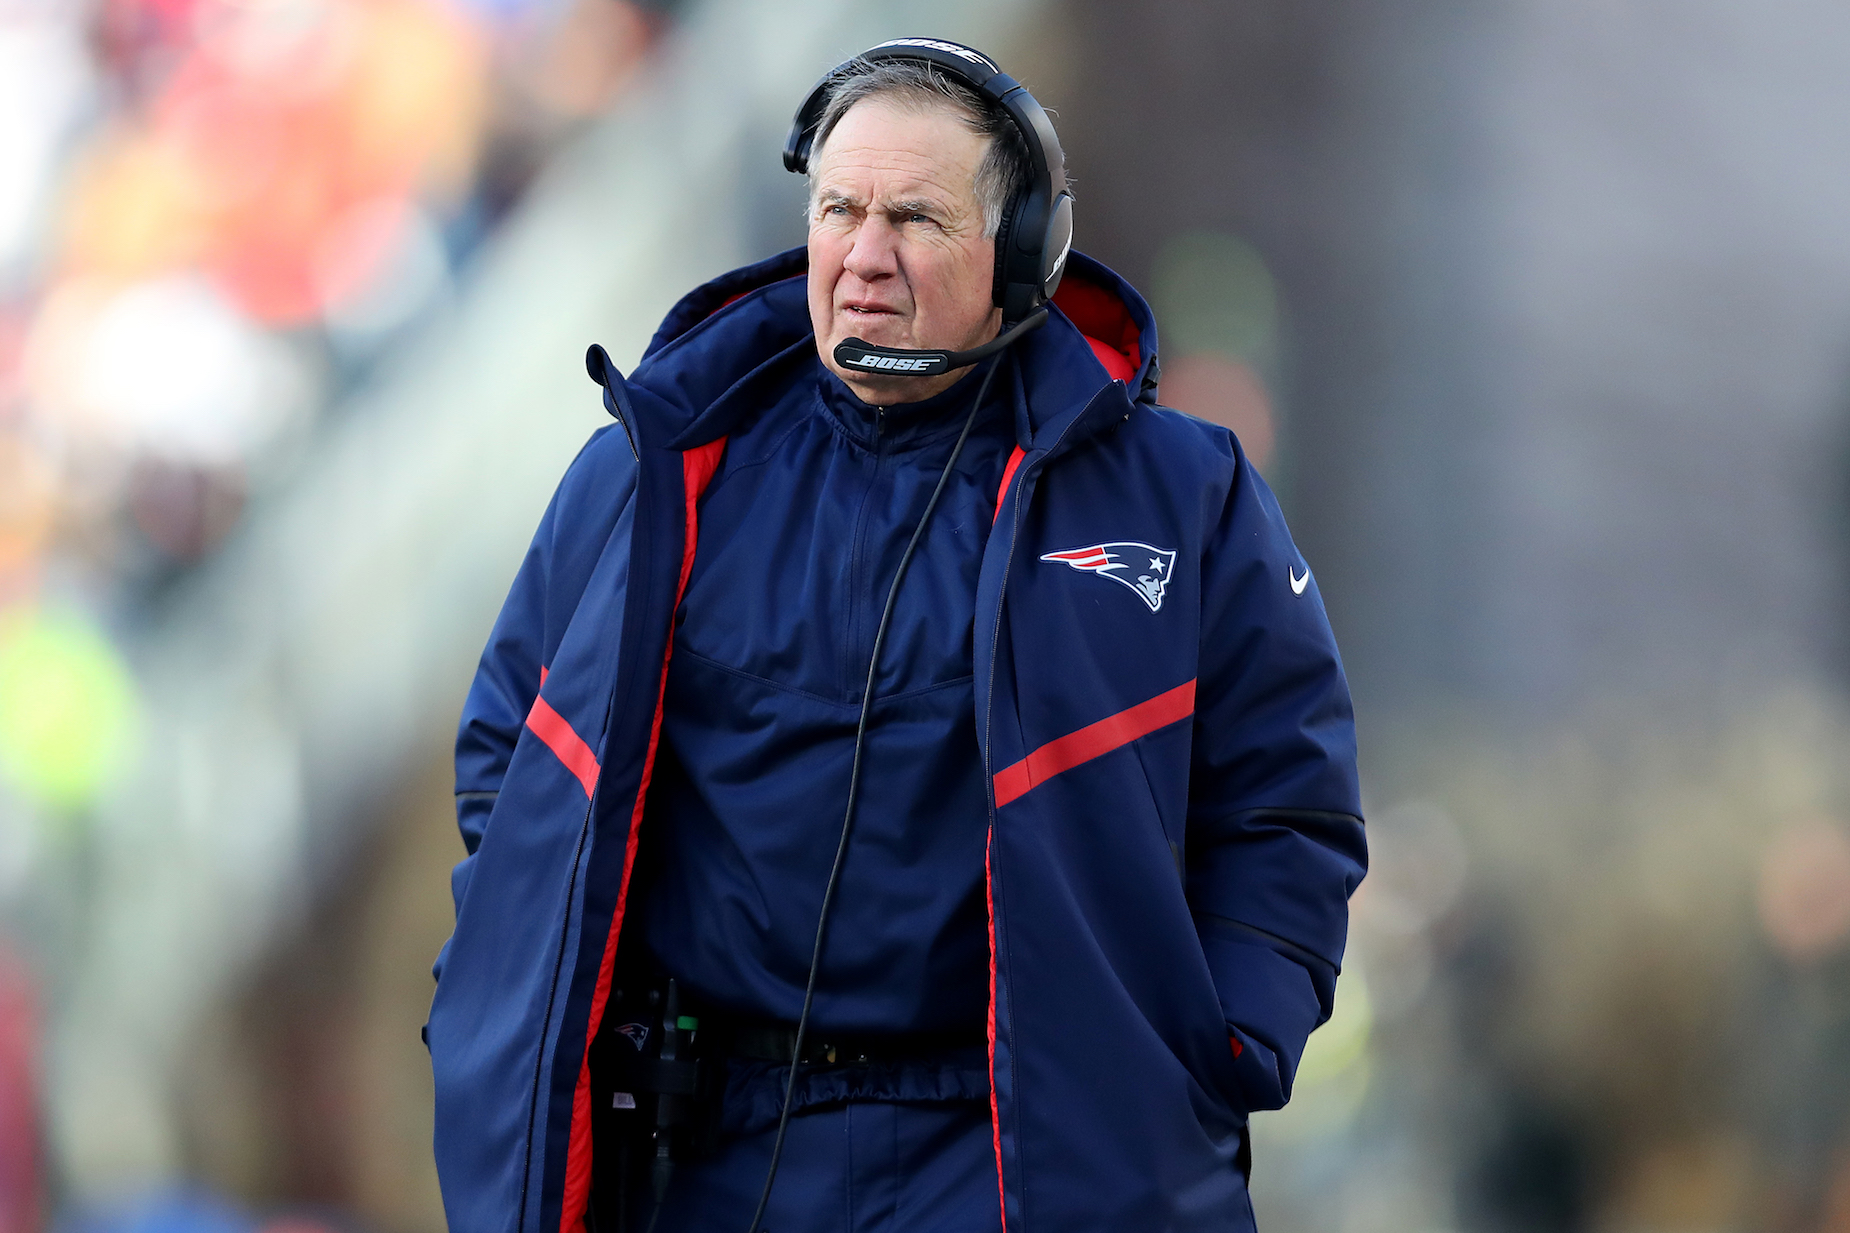 Lamar Miller may have just revealed how Bill Belichick turned the New England Patriots into a dynasty.